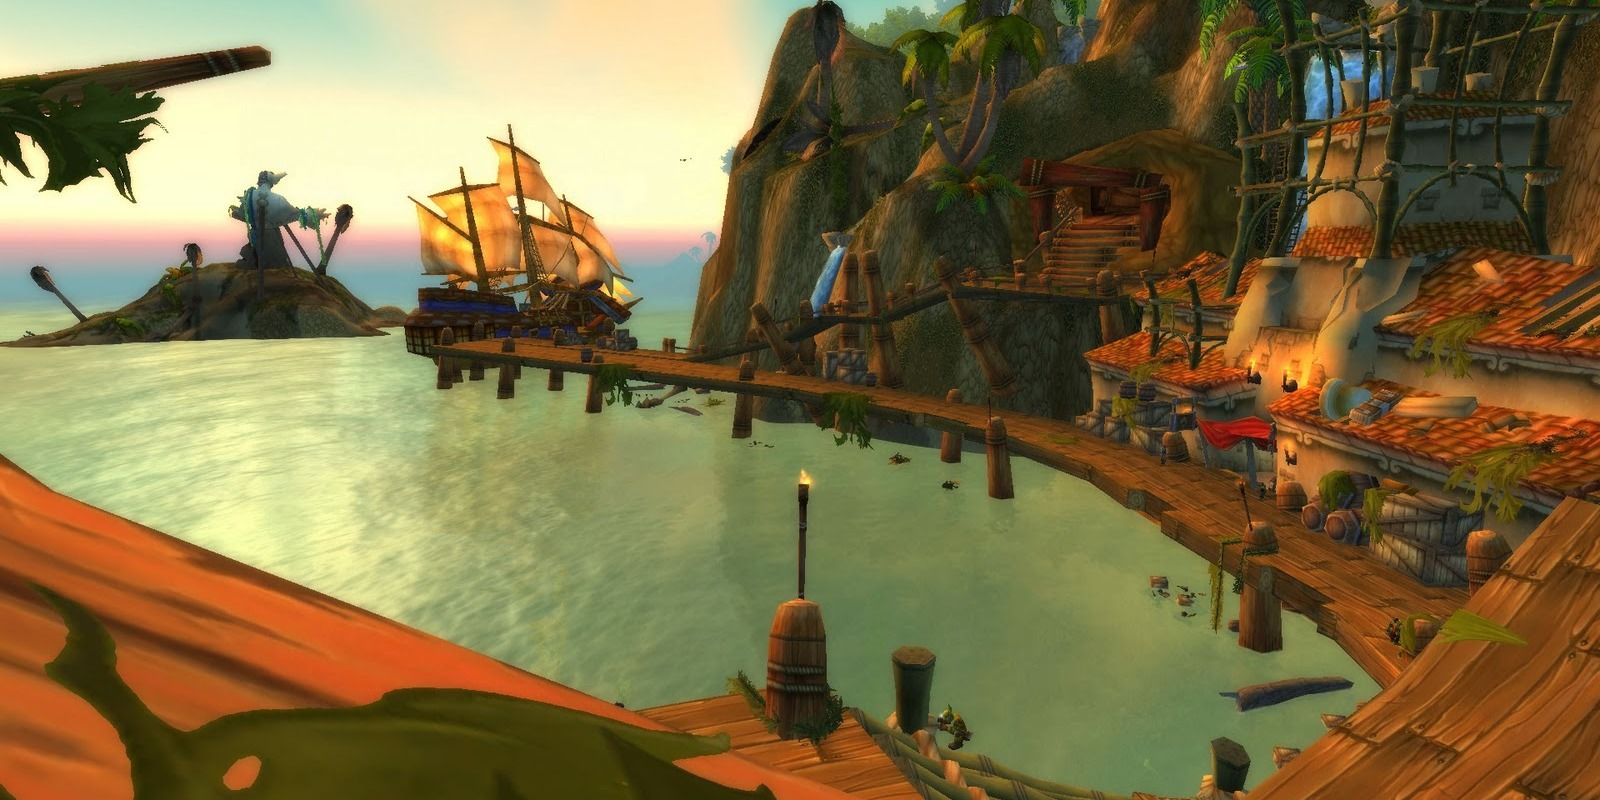 Booty Bay, Stranglethorn Vale in WoW Classic, view of the dock from the FP with ship in port and statue